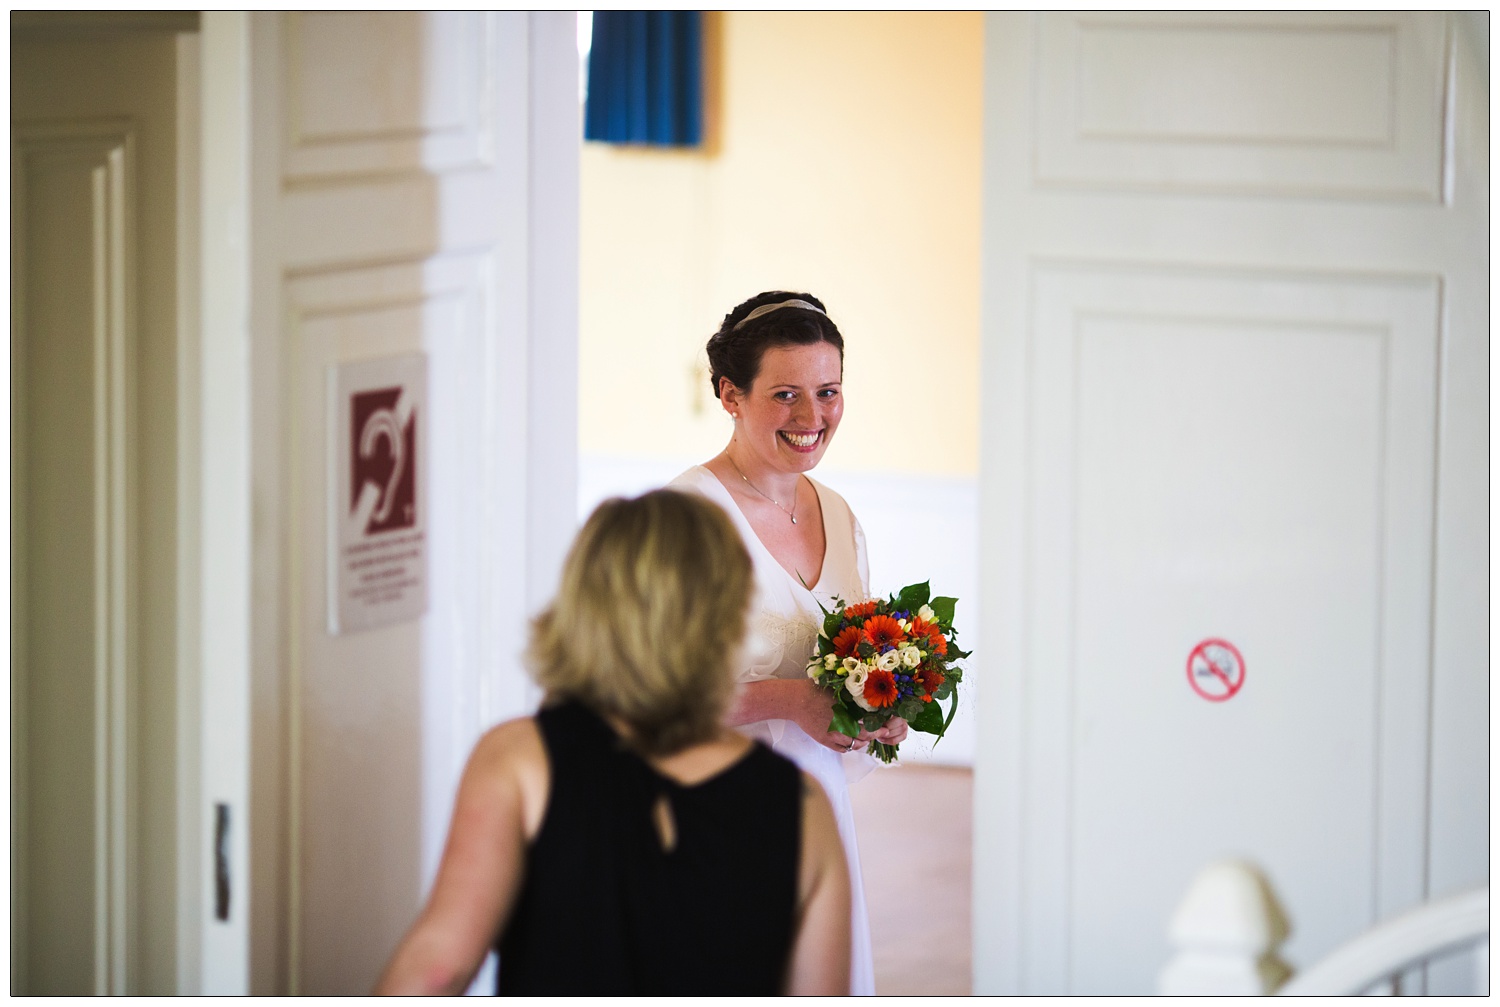 Bride looks excited through a gap in the door as she meets the registrars before the wedding.